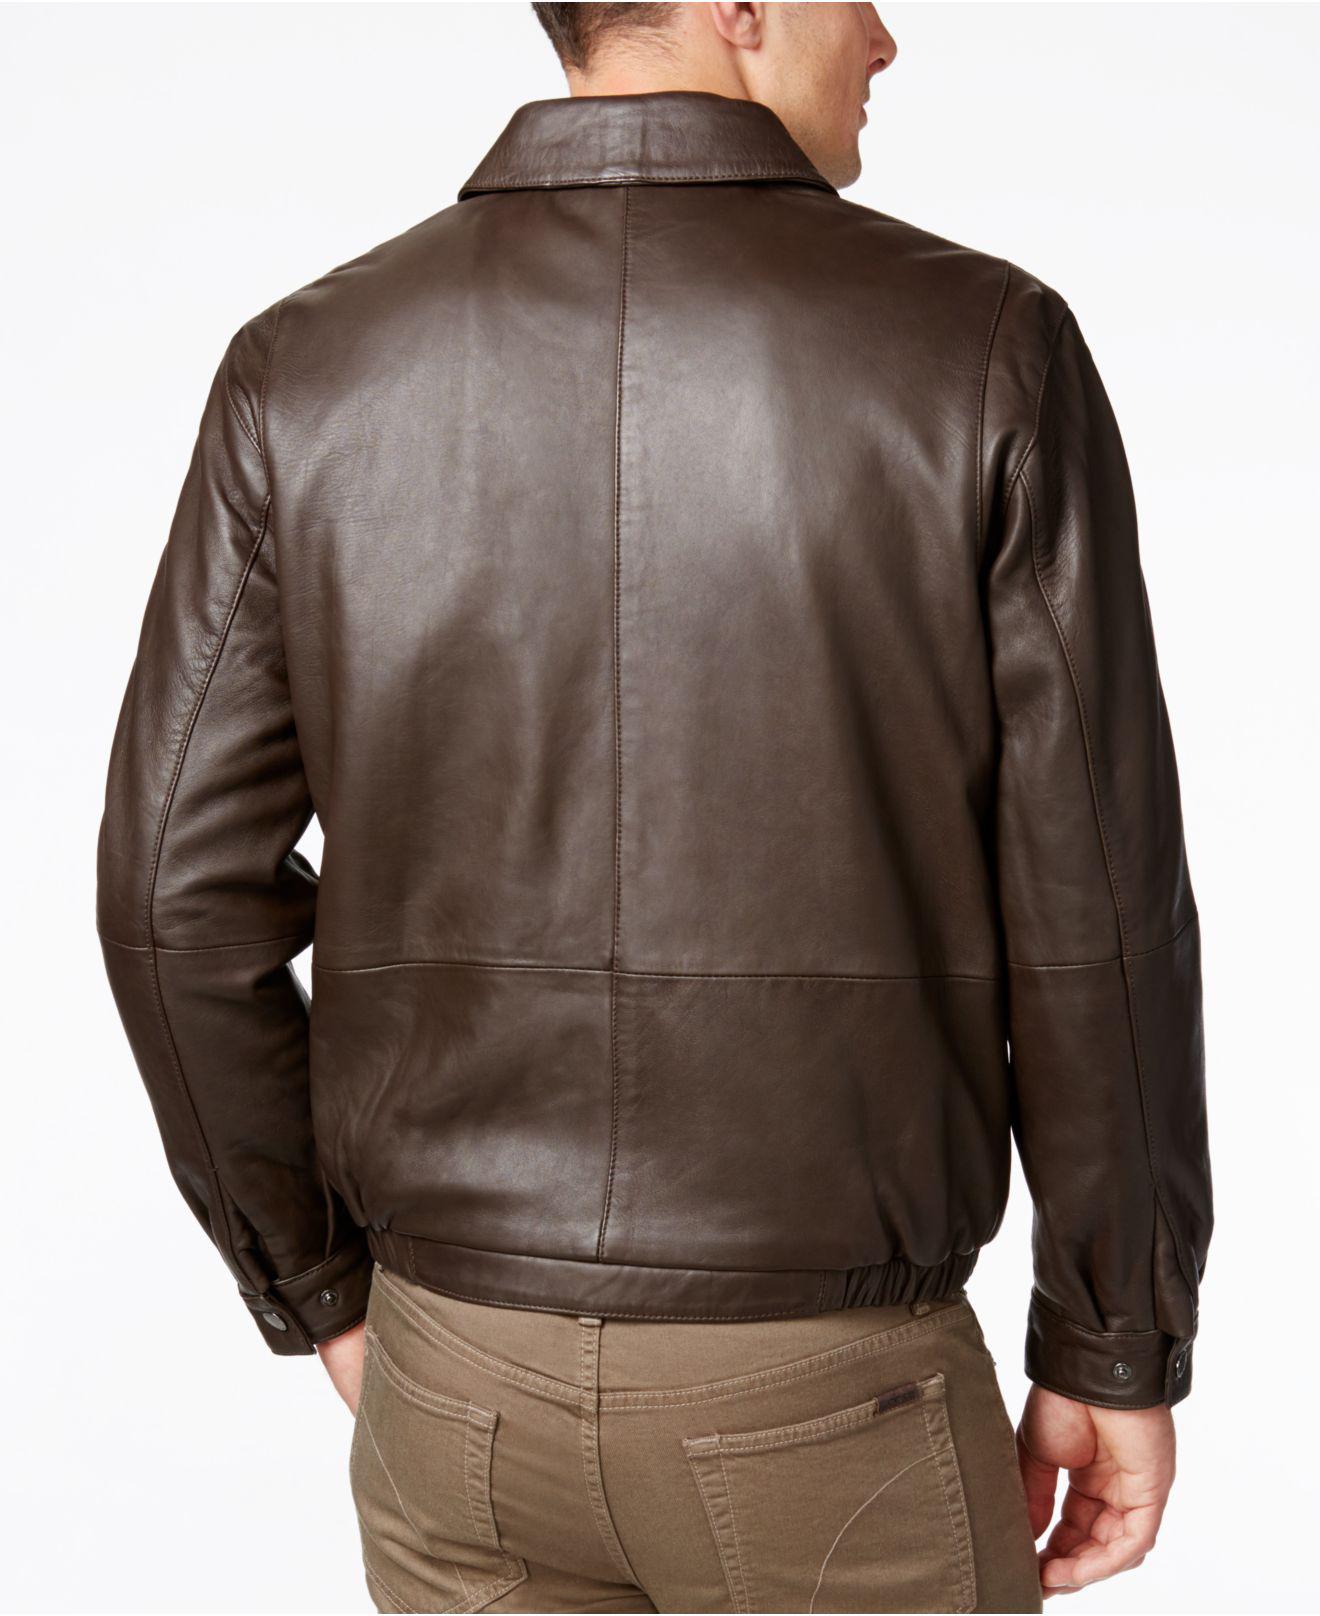 Nautica Big & Tall Point Collar Leather Jacket in Brown for Men - Lyst